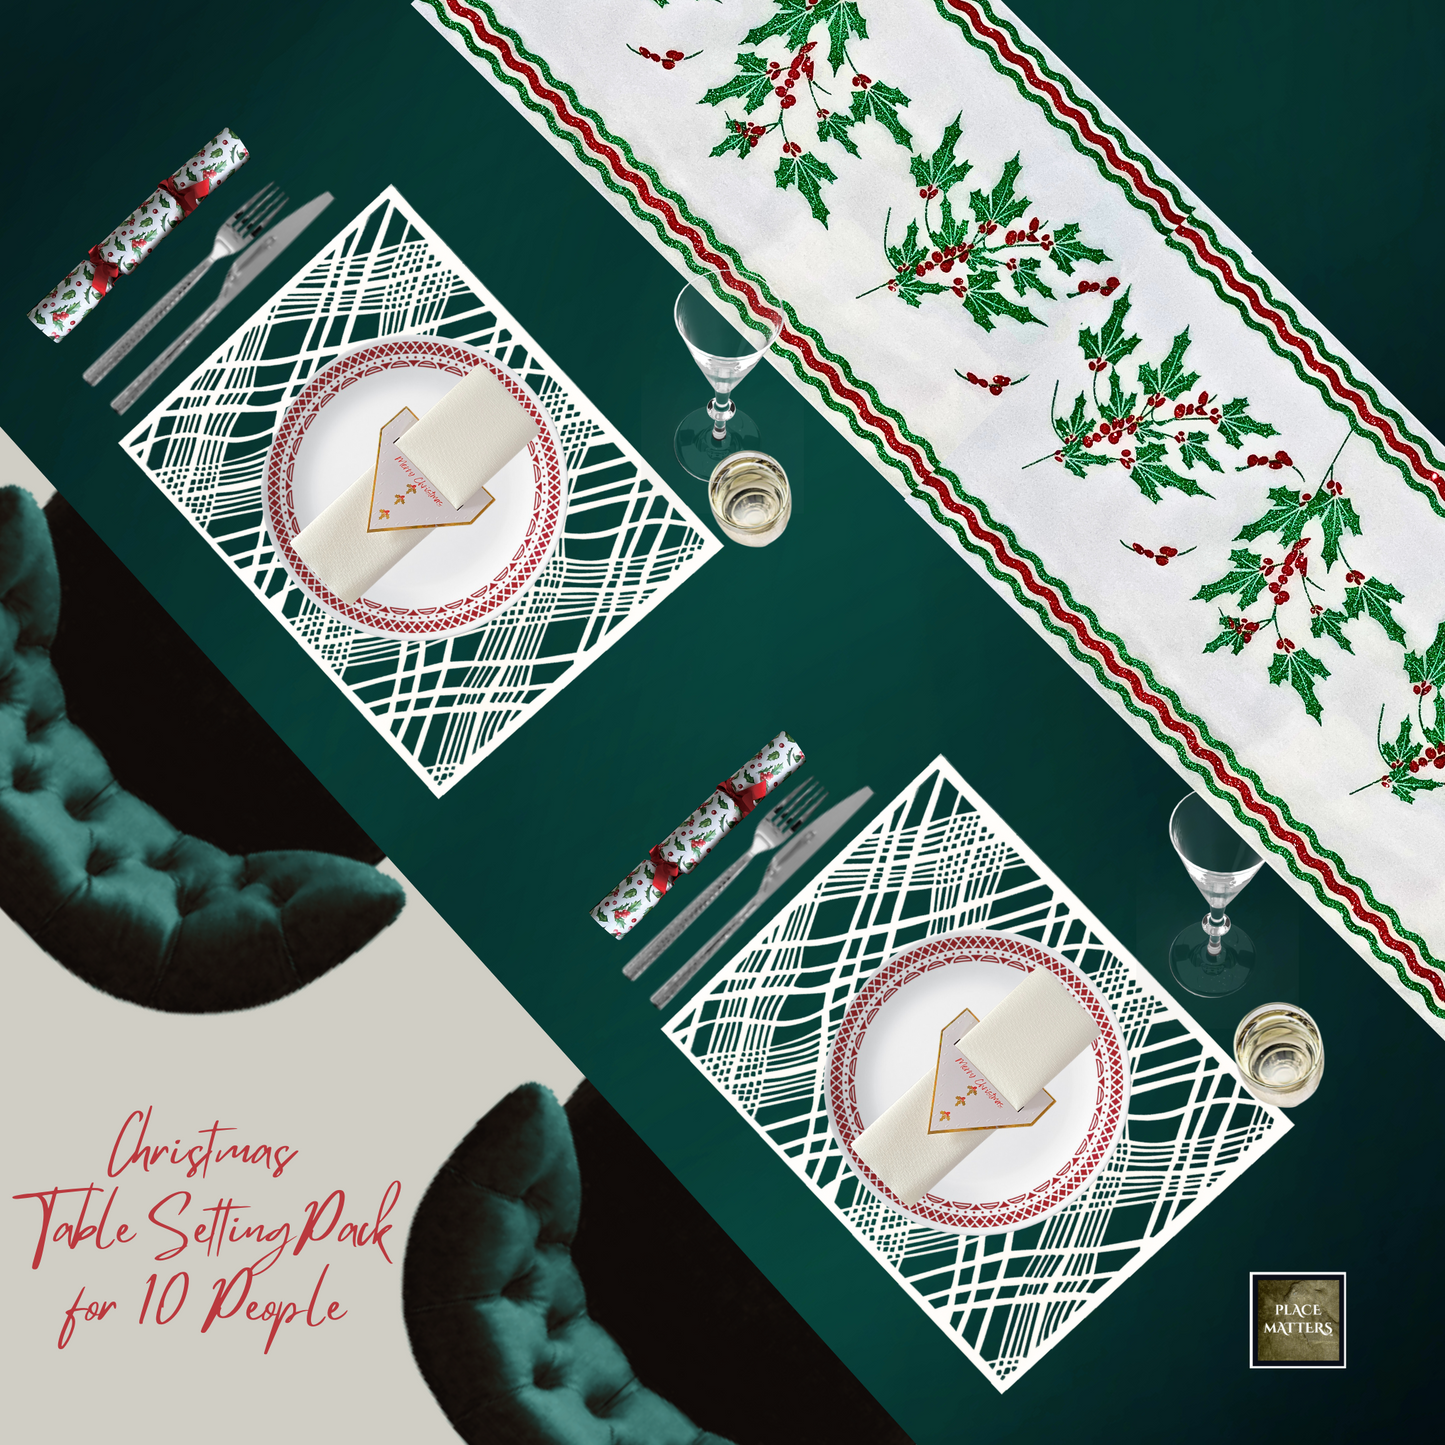 Christmas Table Setting Pack (Holly & Ivy Table Runner)